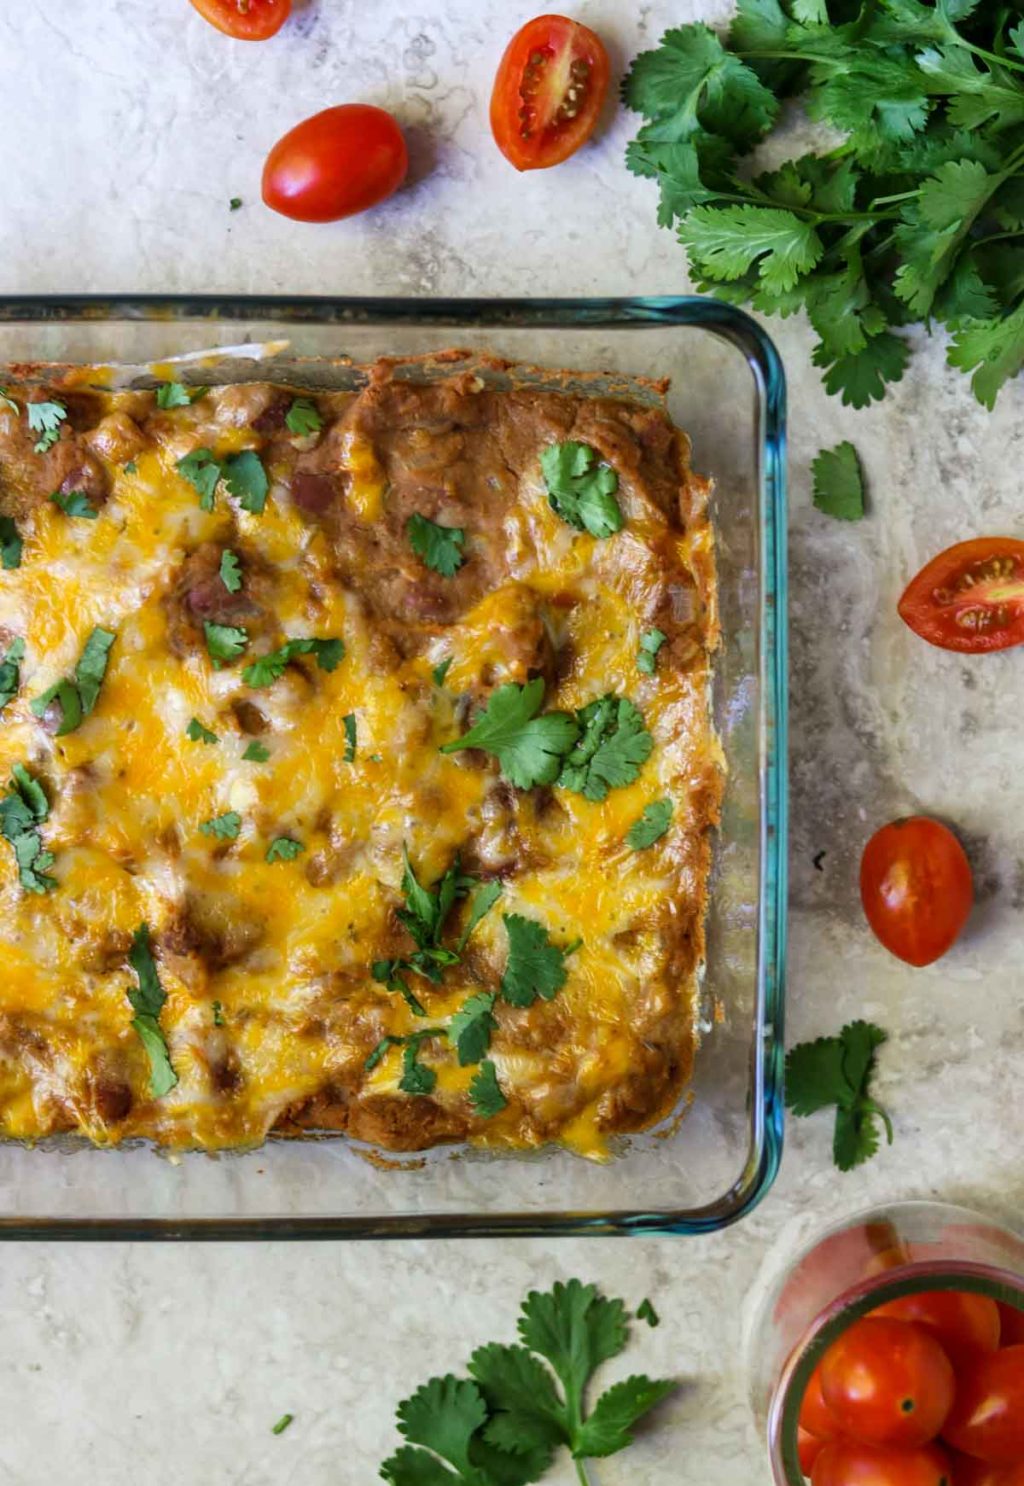 A baking dish of refried beans topped with cheese and cilantro. tomatoes and cilantro scattered on the counter around the baking dish